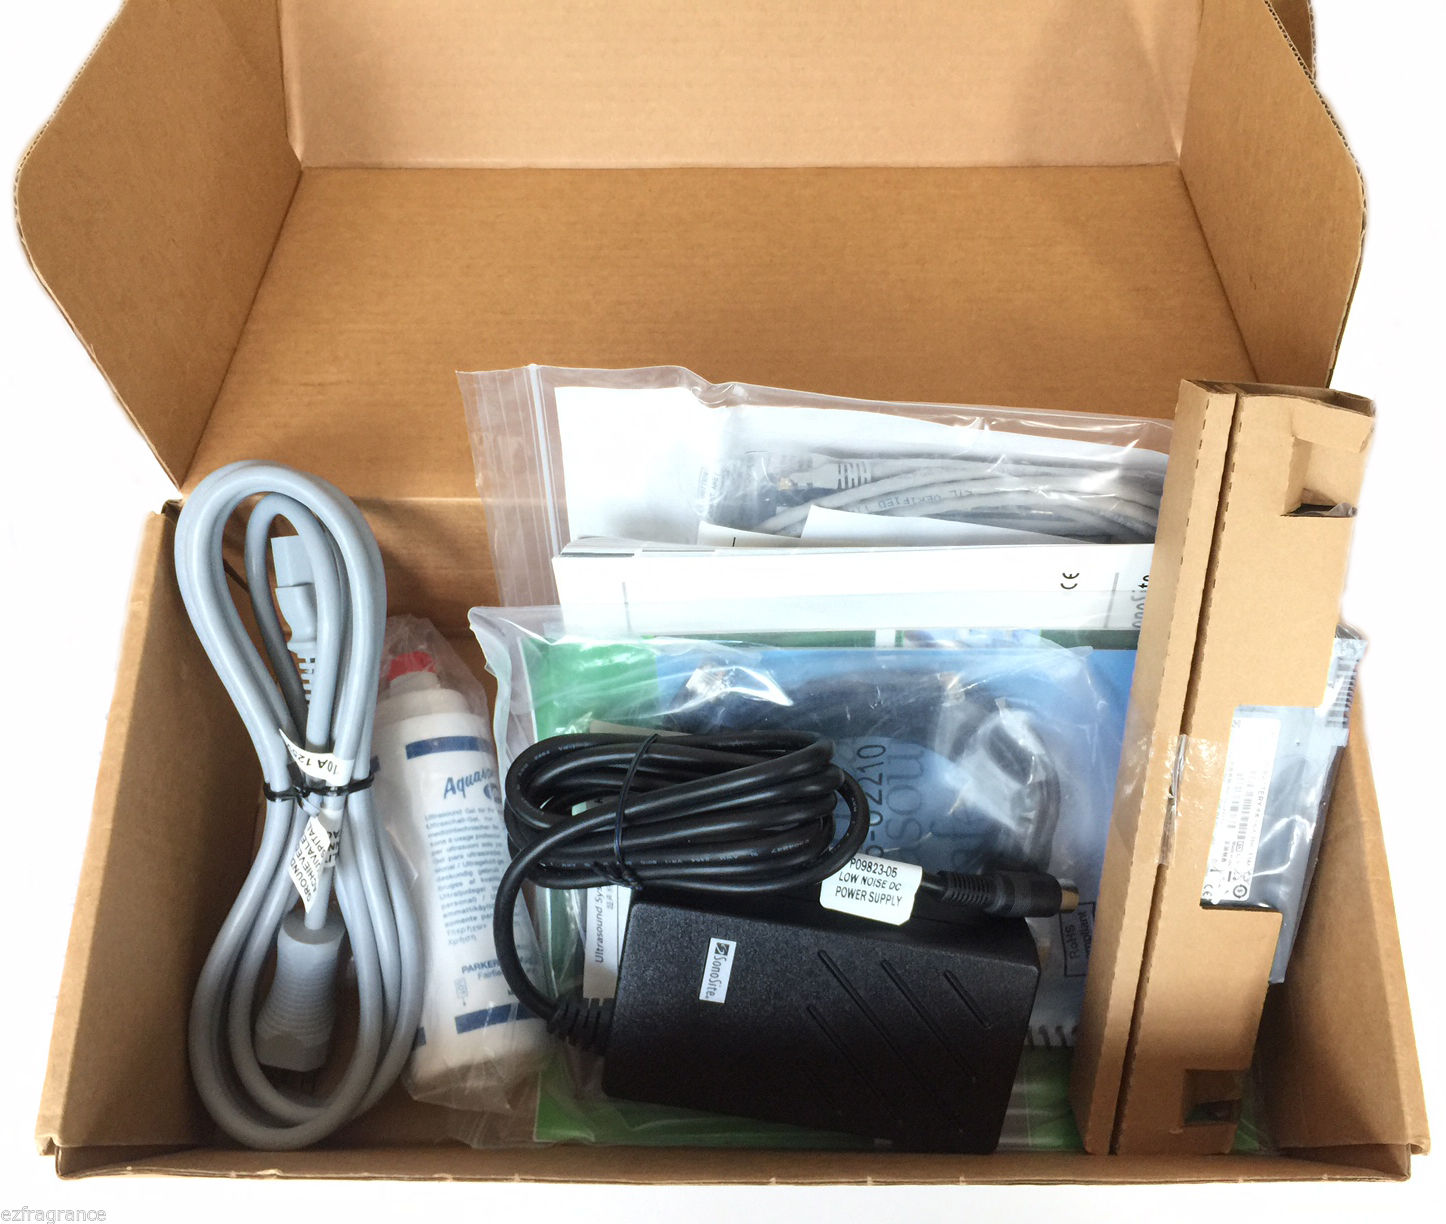 SonoSite M-TURBO ULTRASOUND SYSTEM.SPANISH LANGUAGE New in box DIAGNOSTIC ULTRASOUND MACHINES FOR SALE